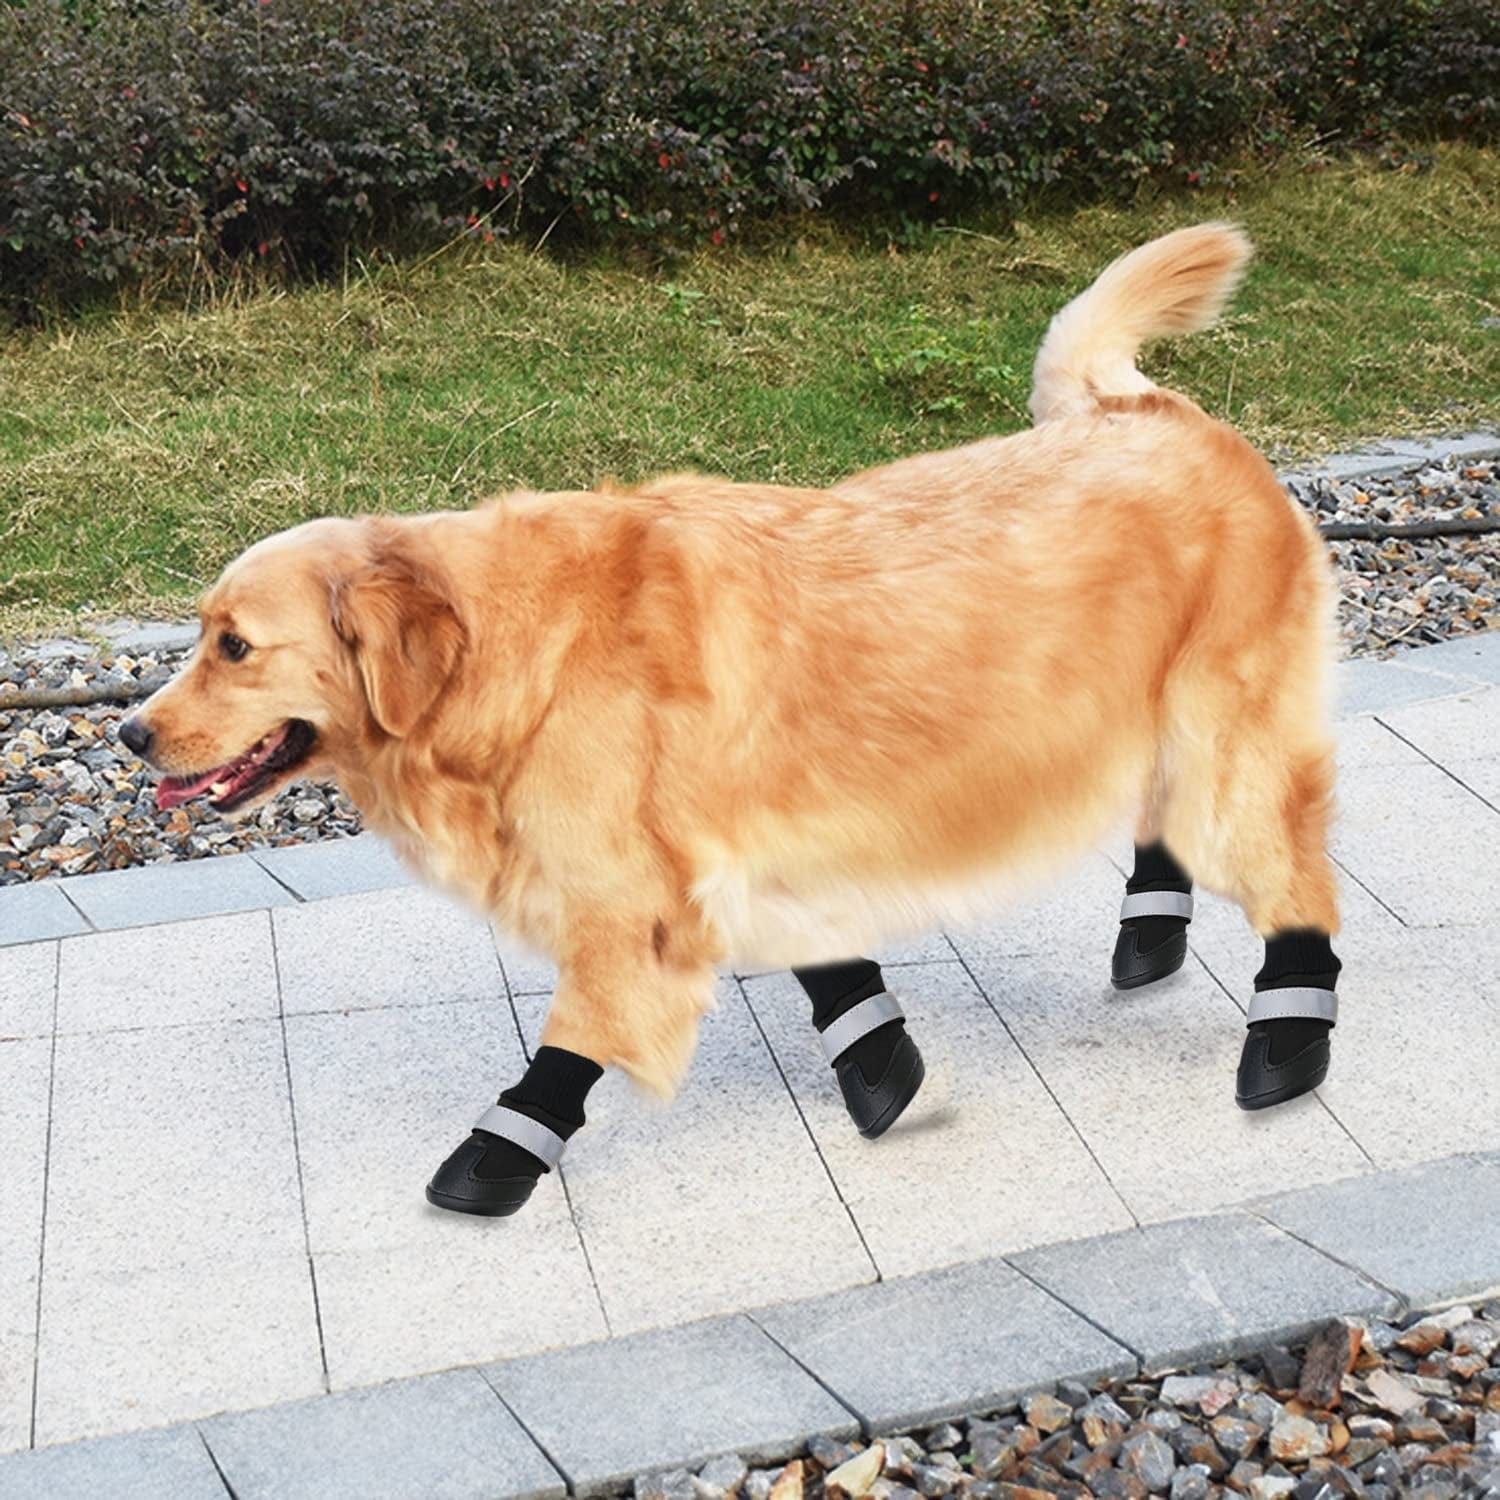 Dog Shoes, BESUNTEK Waterproof Dog Boots Paw Protector Snow Nonslip Rubber with Reflective Strip, Warm Lining, for Medium & Large Dogs 4 Pcs (Black, XL)